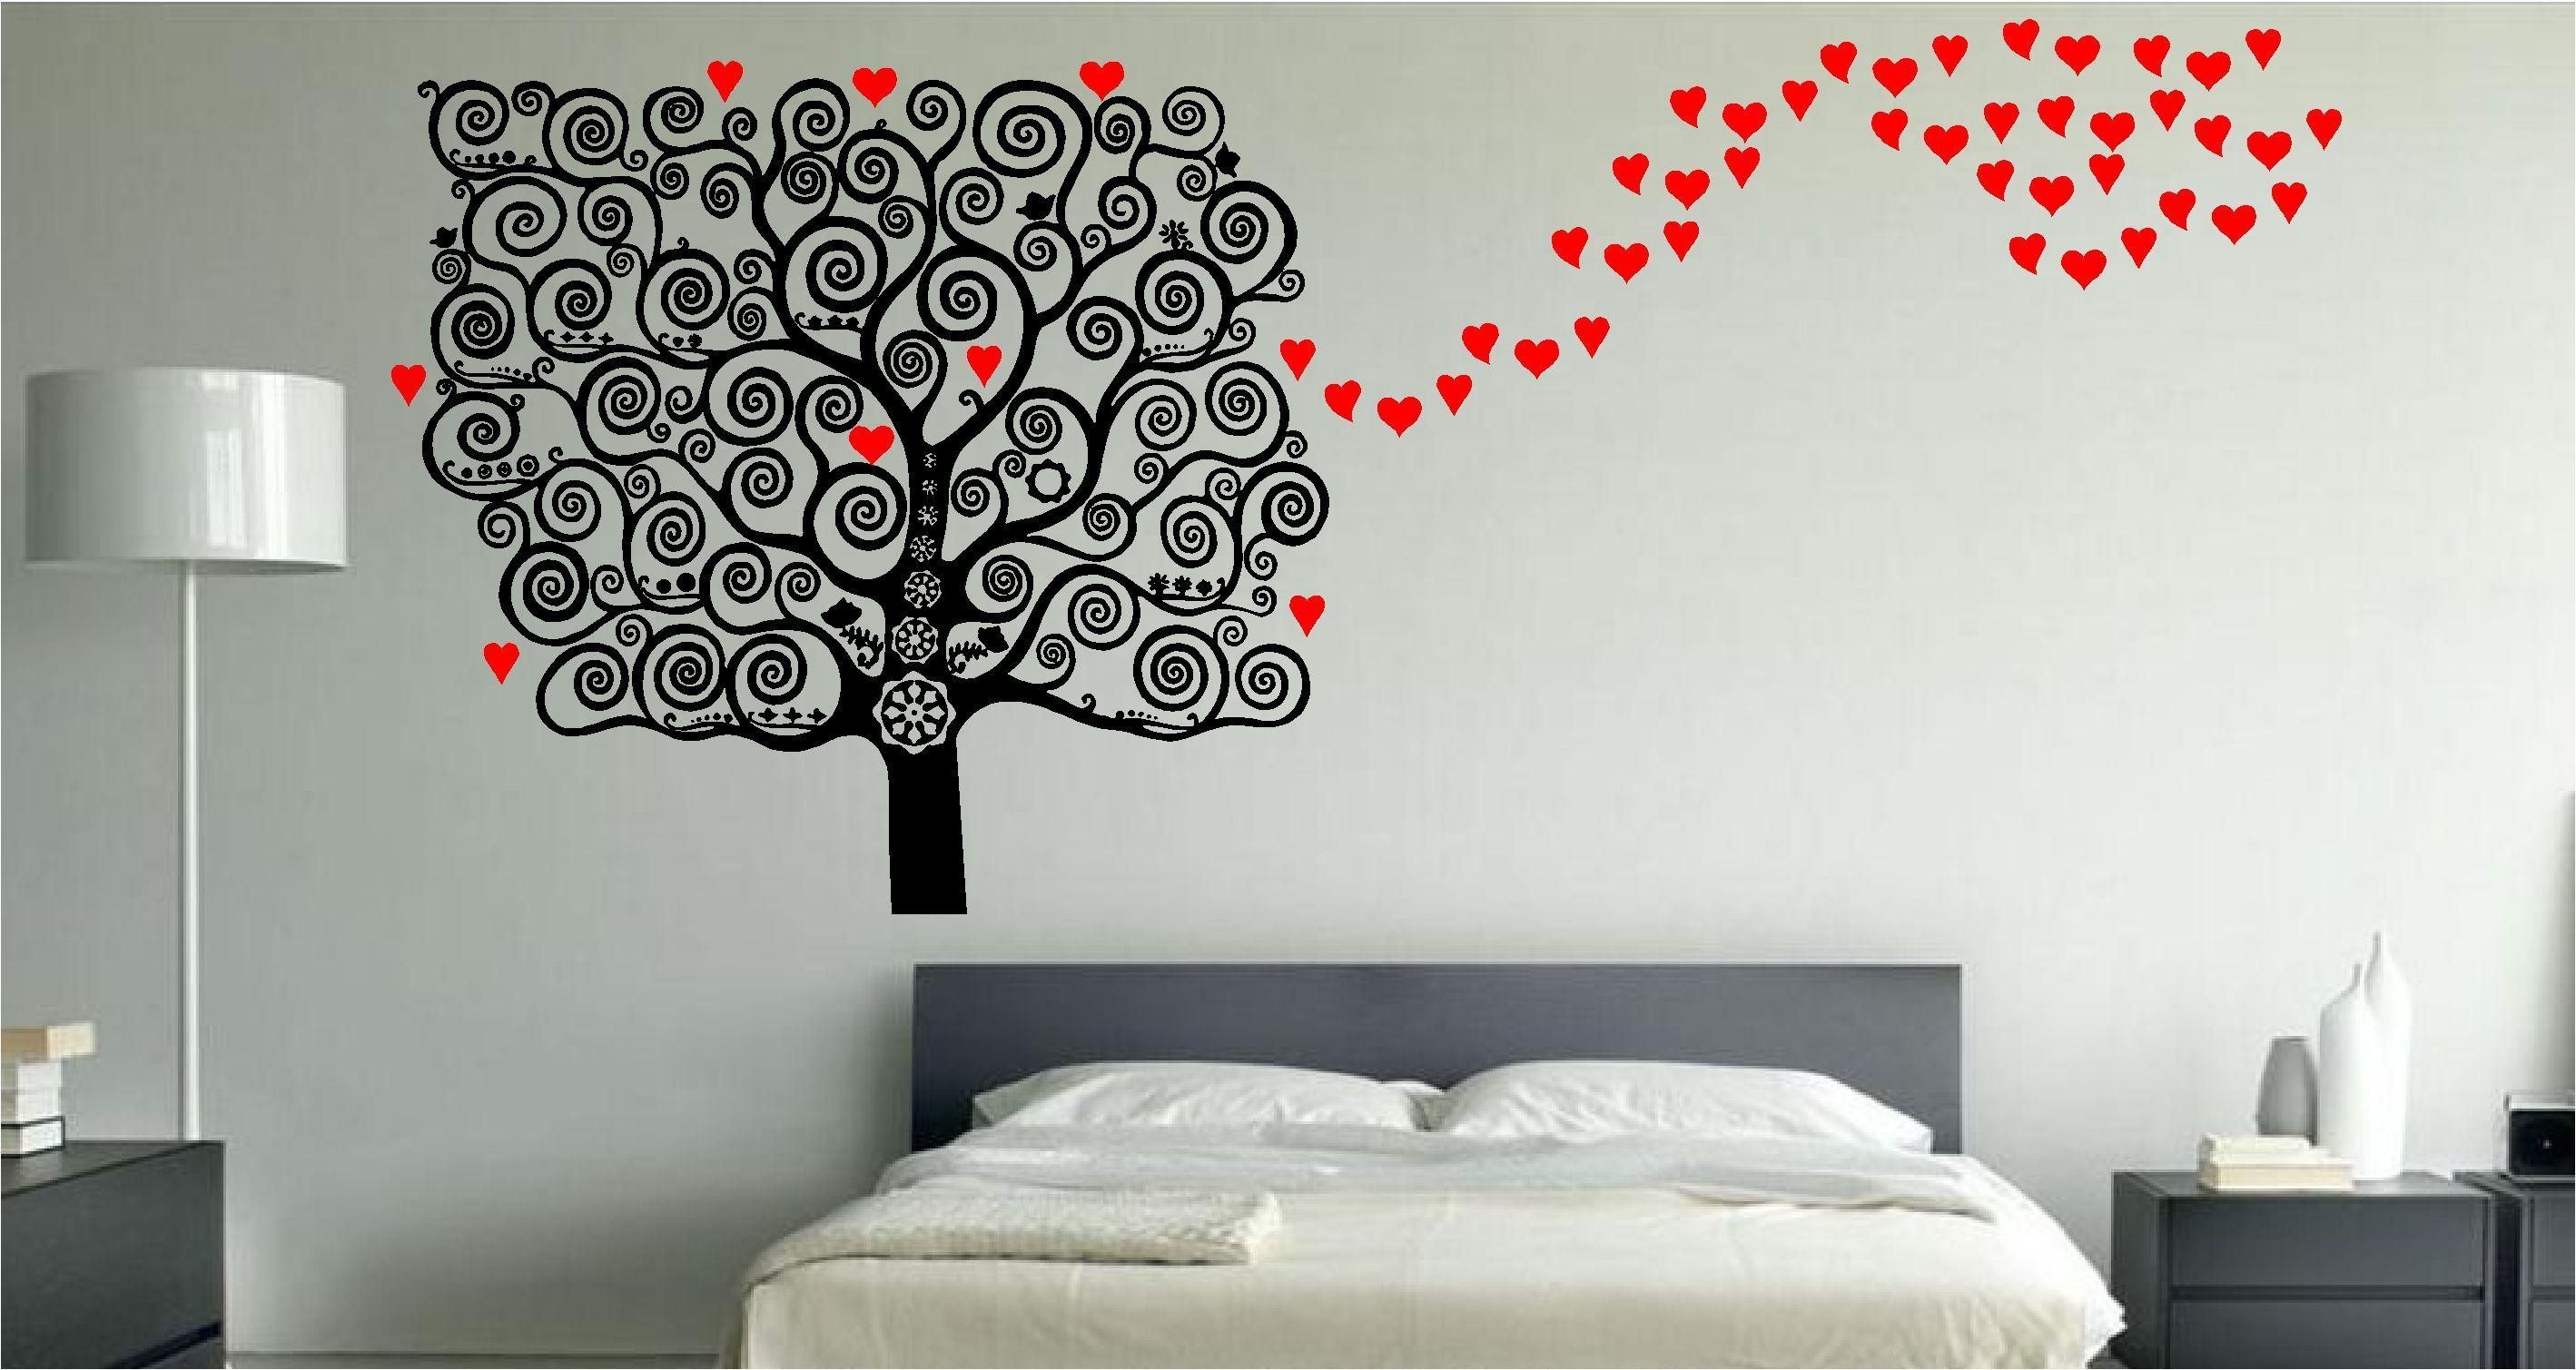 Special Bedroom Wall Art Theme For Cozy And Decorative Look Intended For Bedroom Wall Art (View 1 of 20)